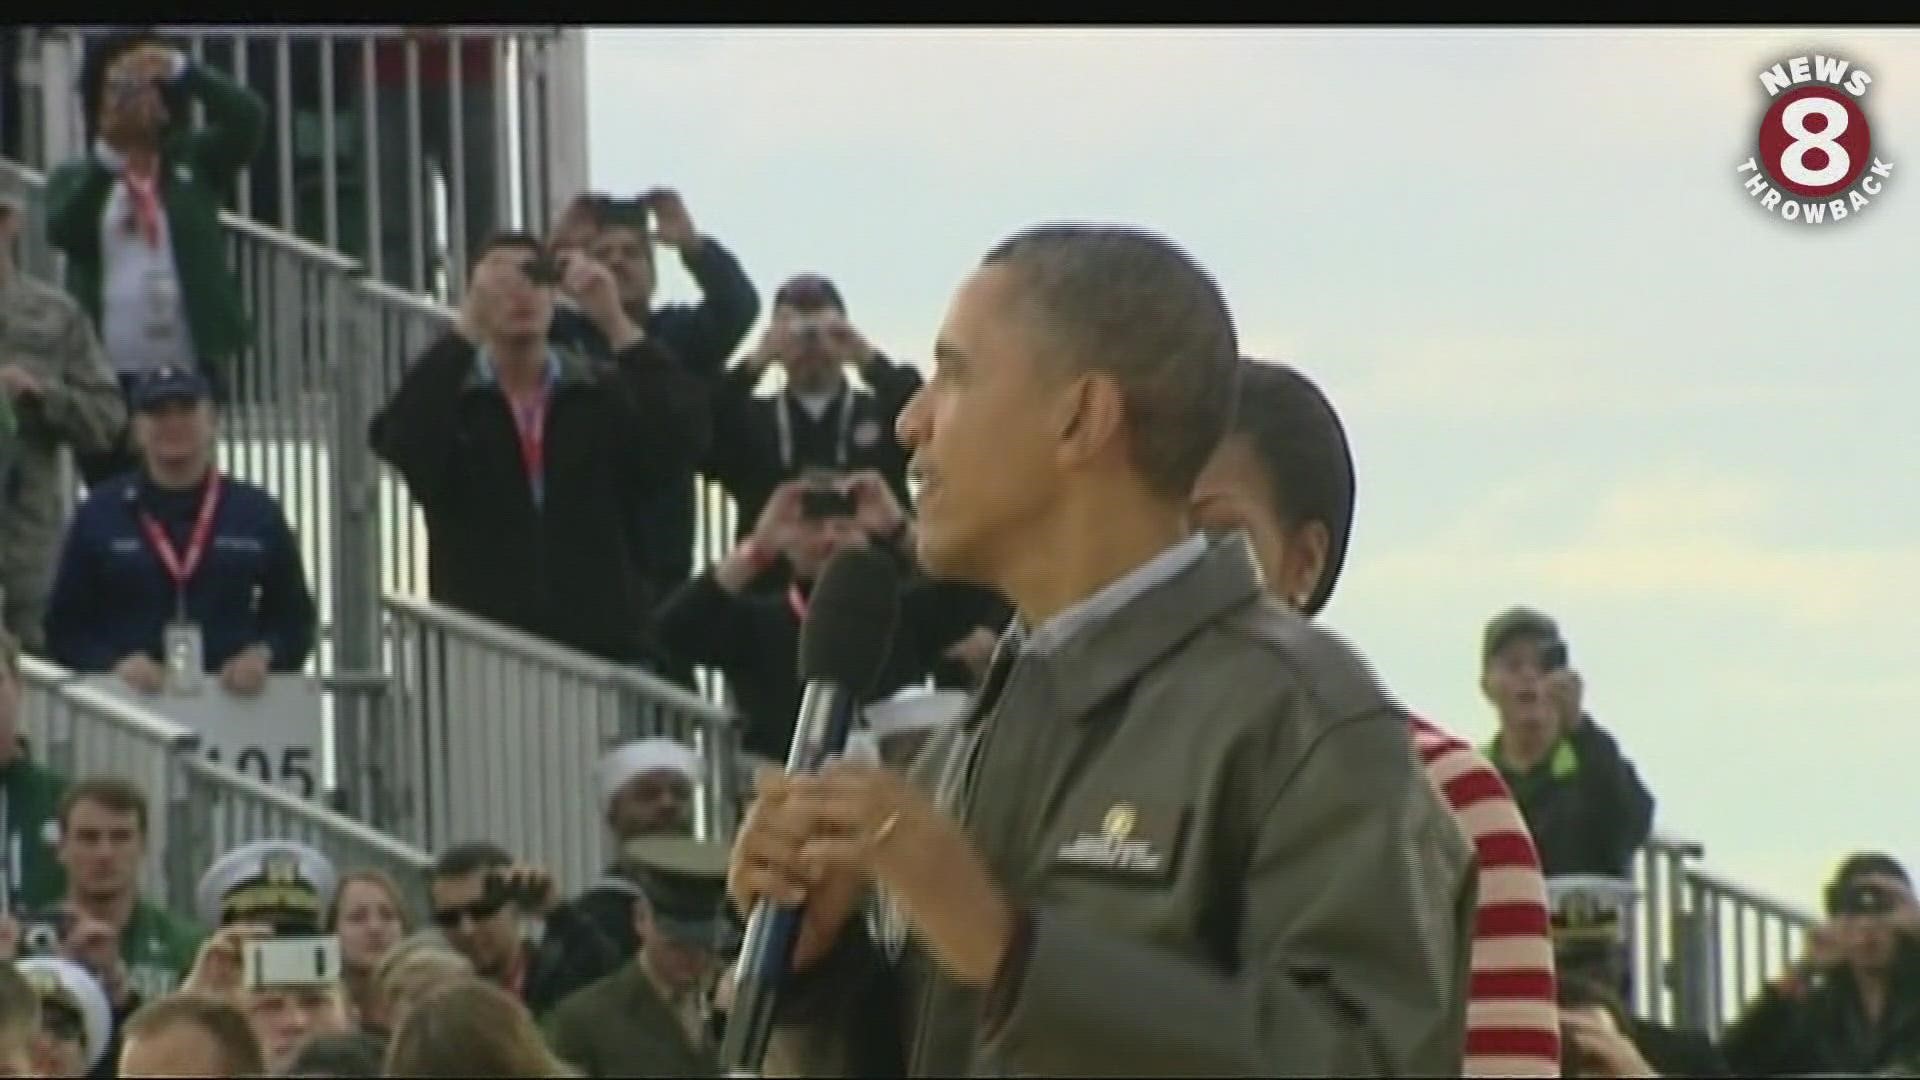 President Barack Obama visited San Diego to watch North Carolina face Michigan State in the inaugural Carrier Classic game aboard the USS Carl Vinson in Nov 2011.